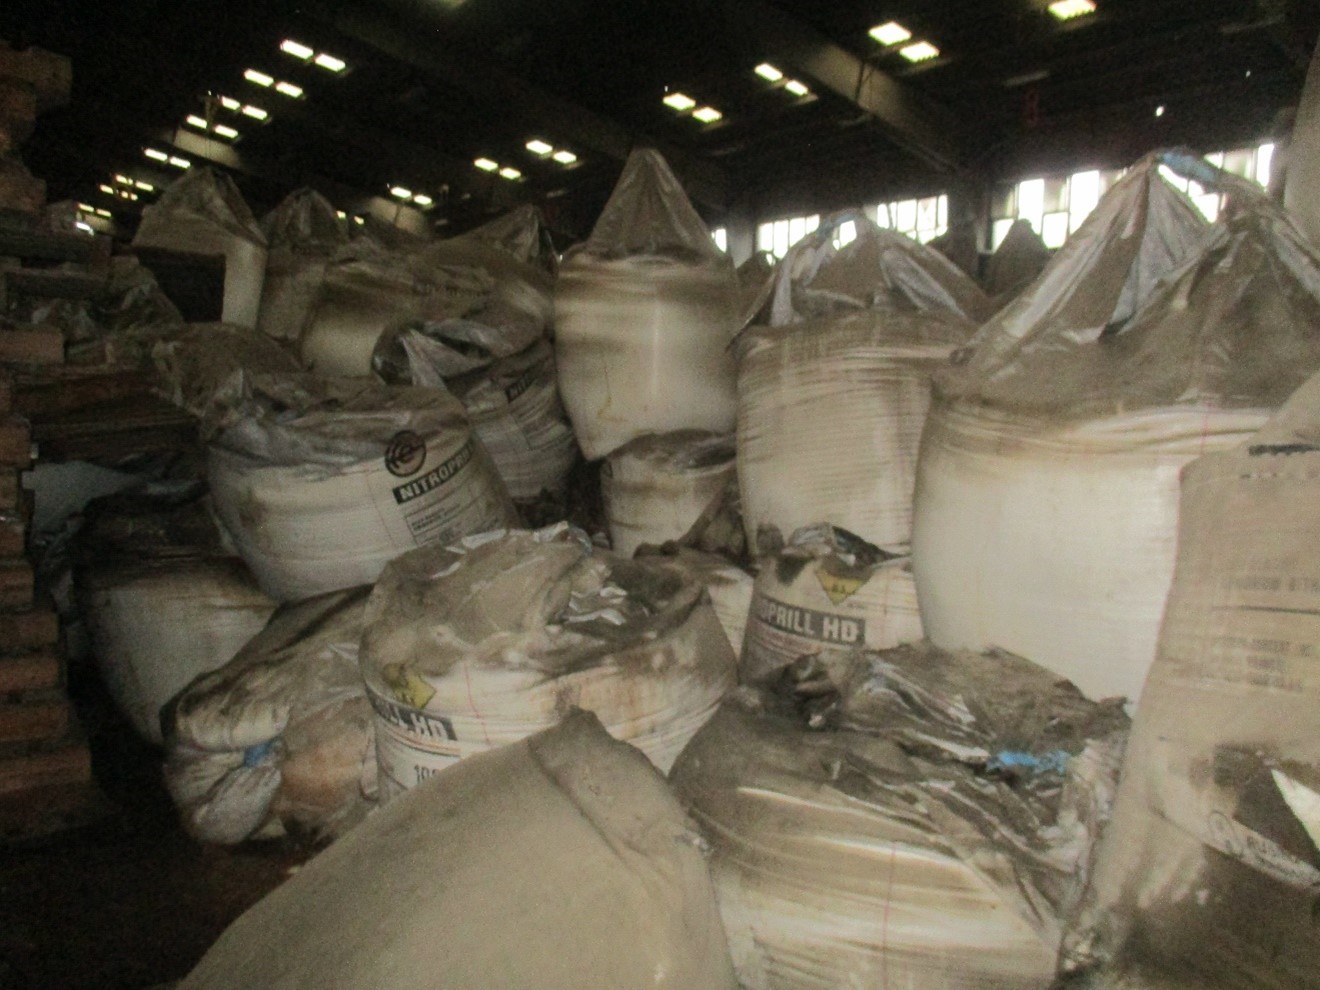 stacks of bags labeled ammonium nitrate